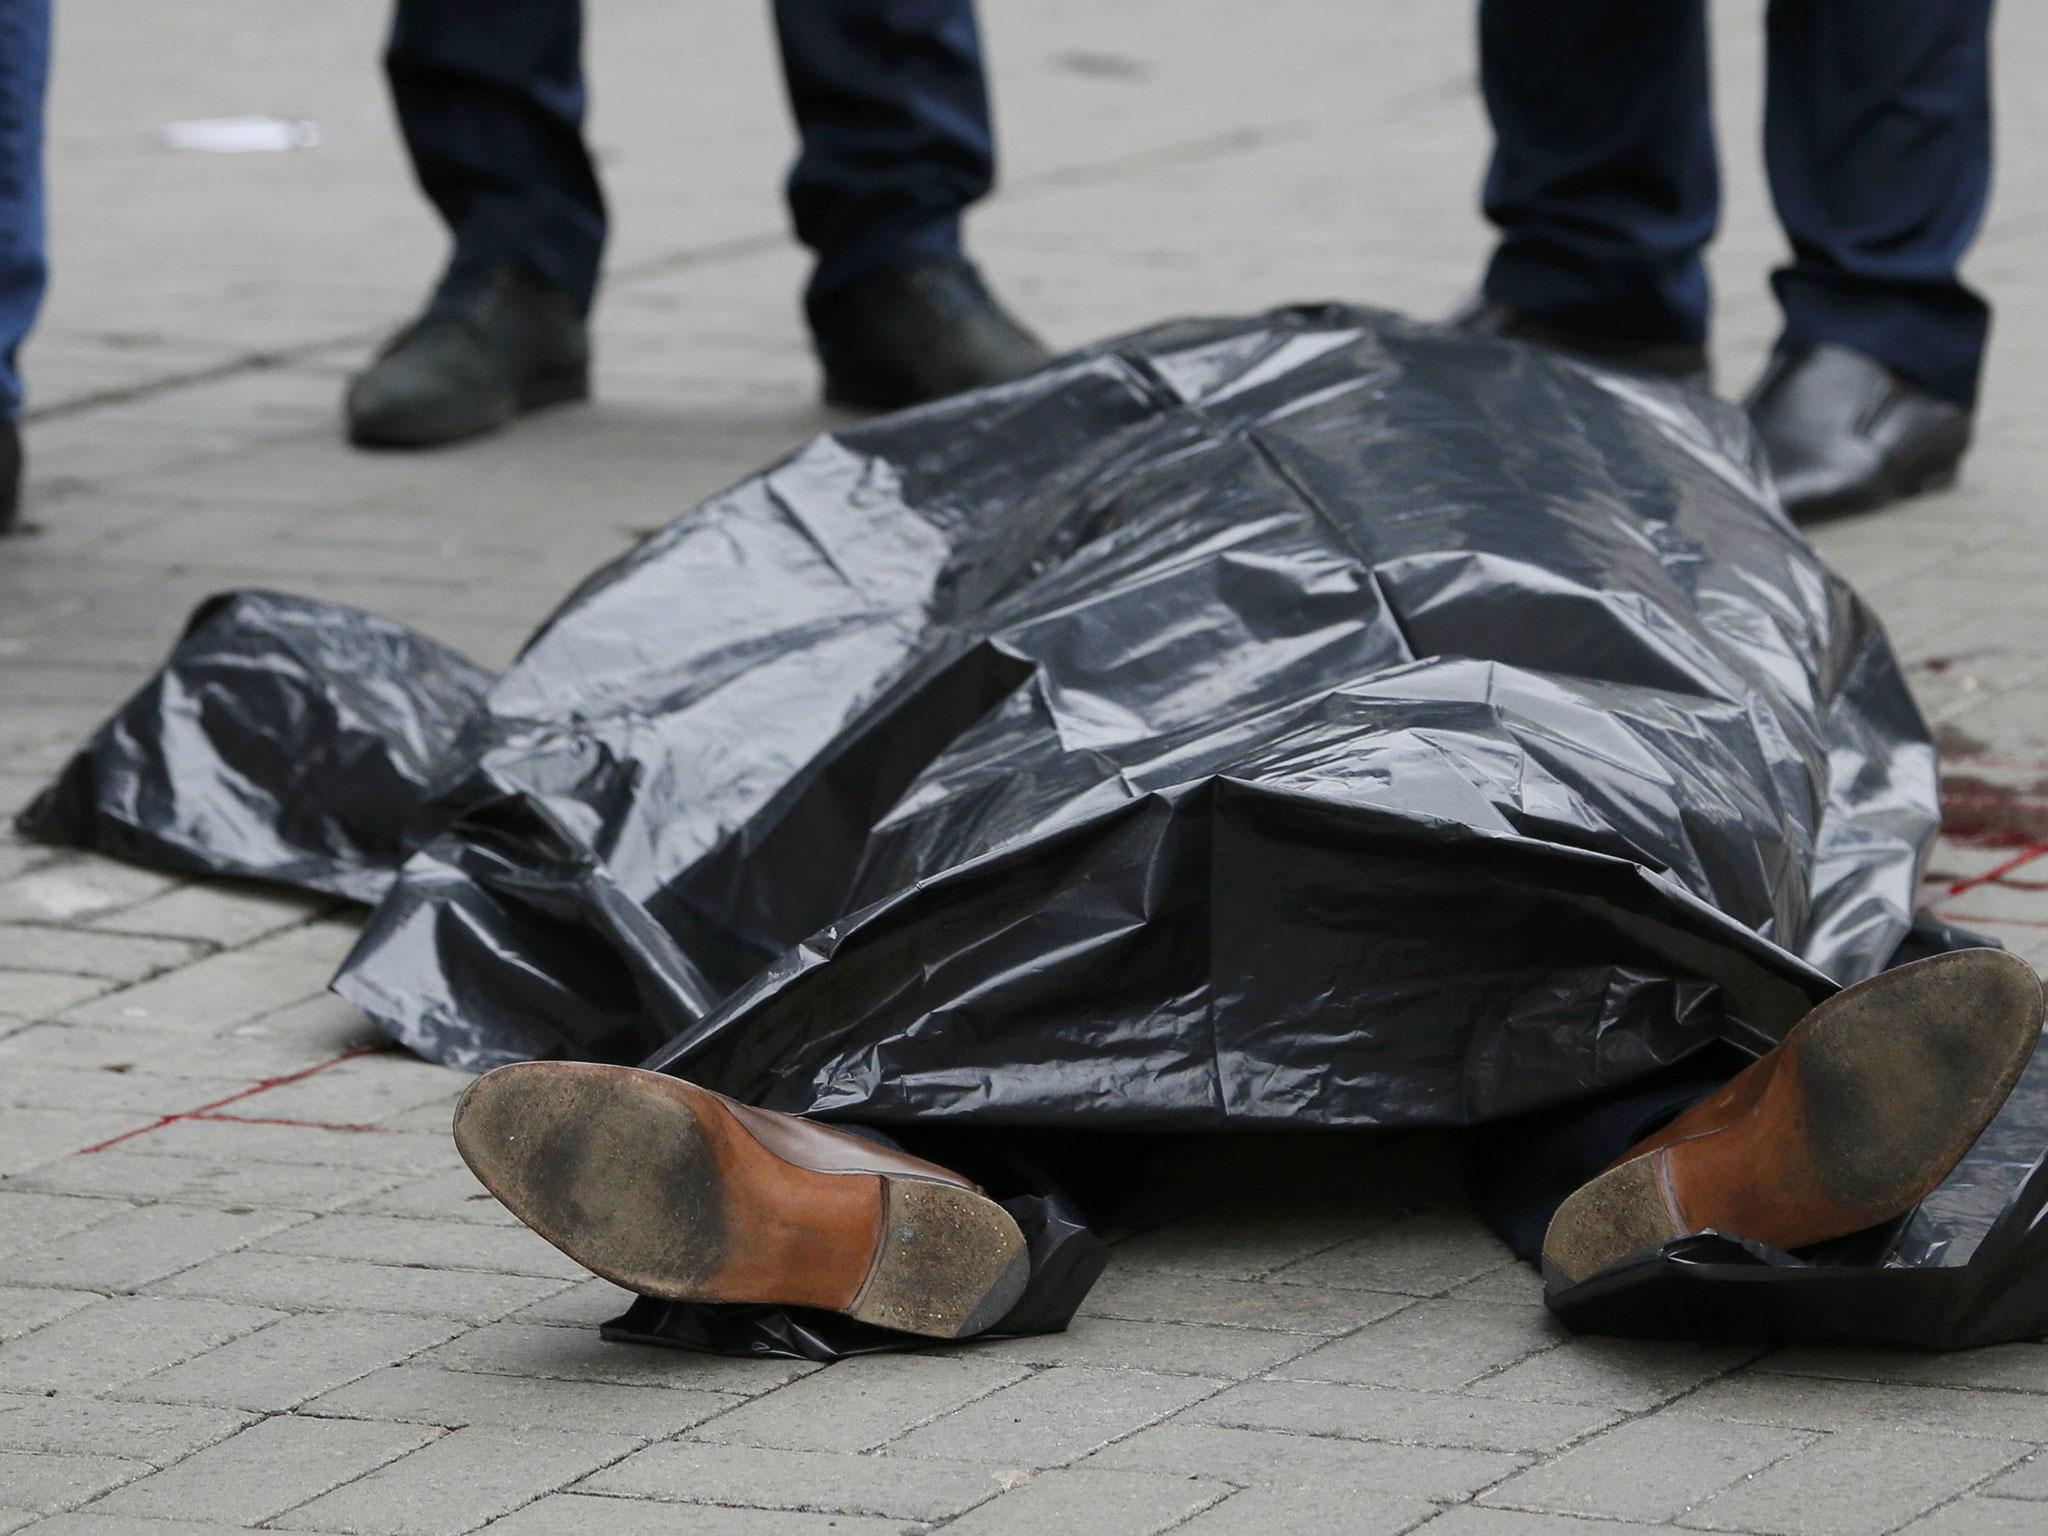 The covered body of Denis Voronenkov is seen outside a hotel in central Kiev